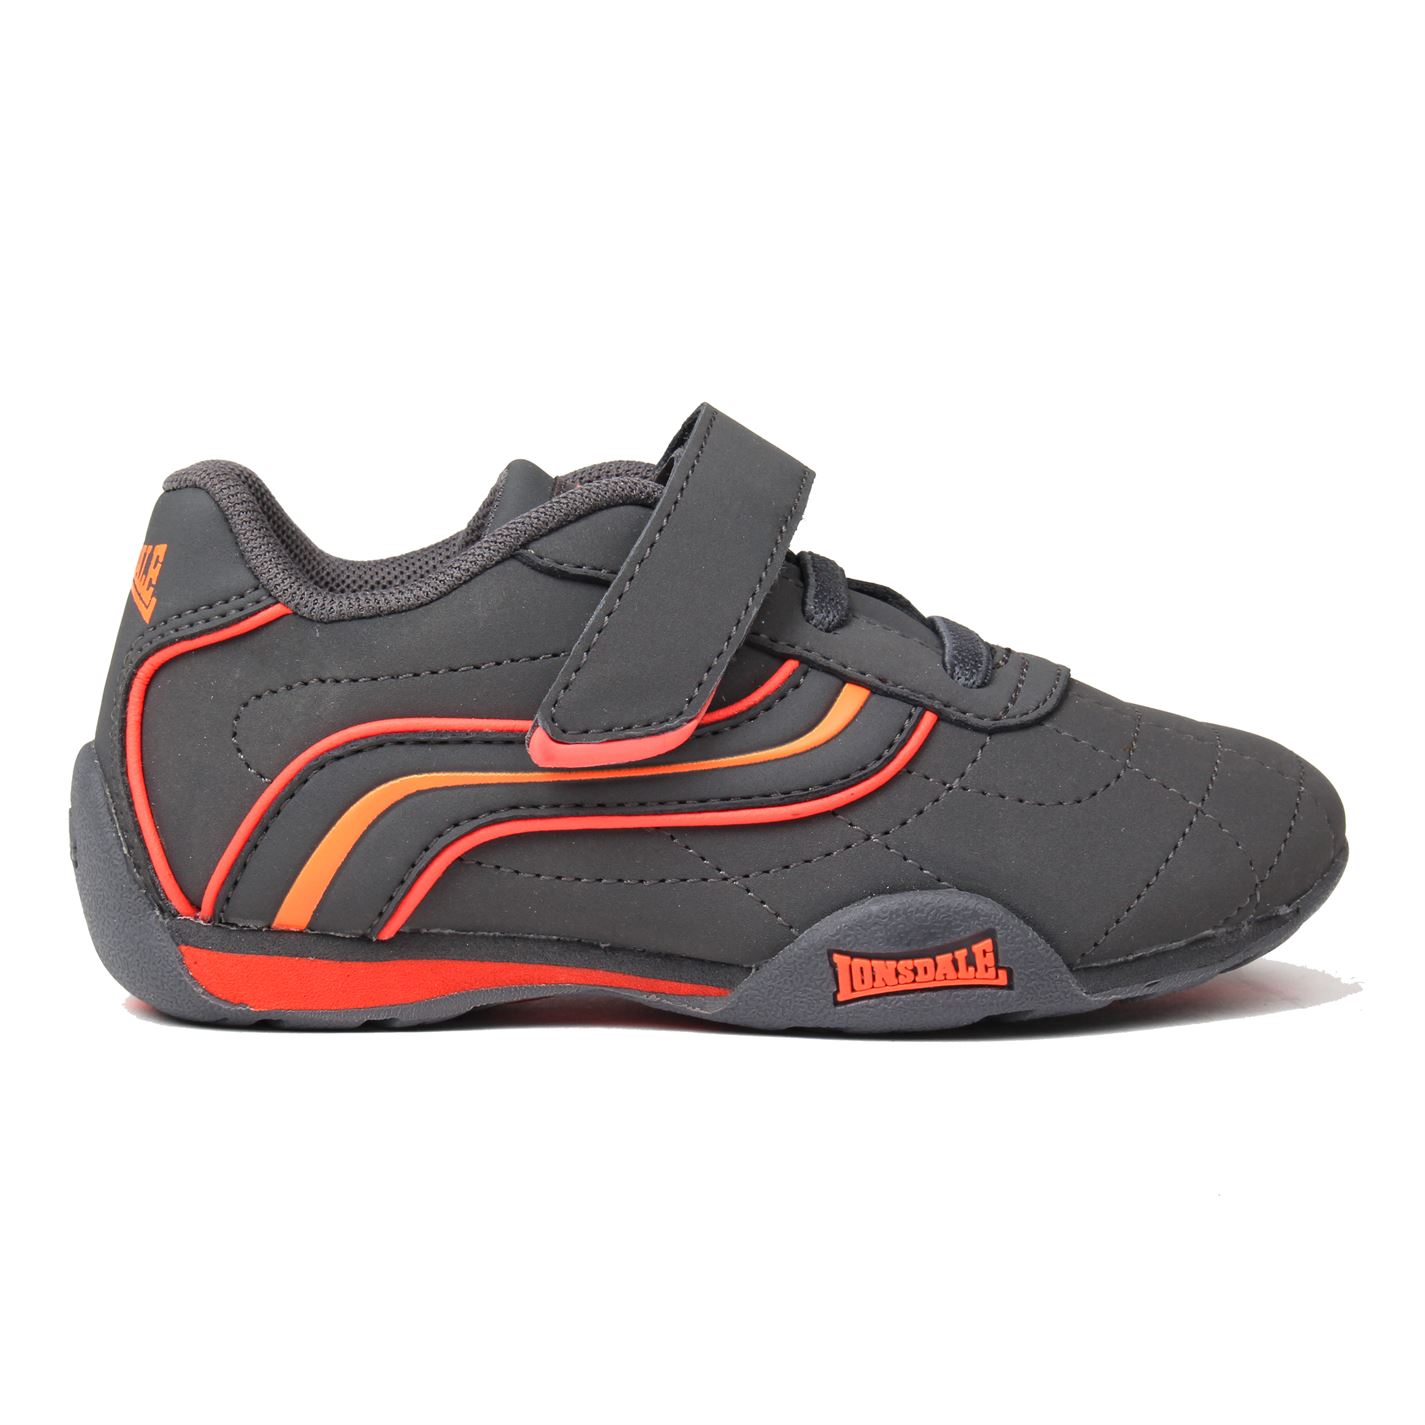 Lonsdale Camden Infant Boys Trainers